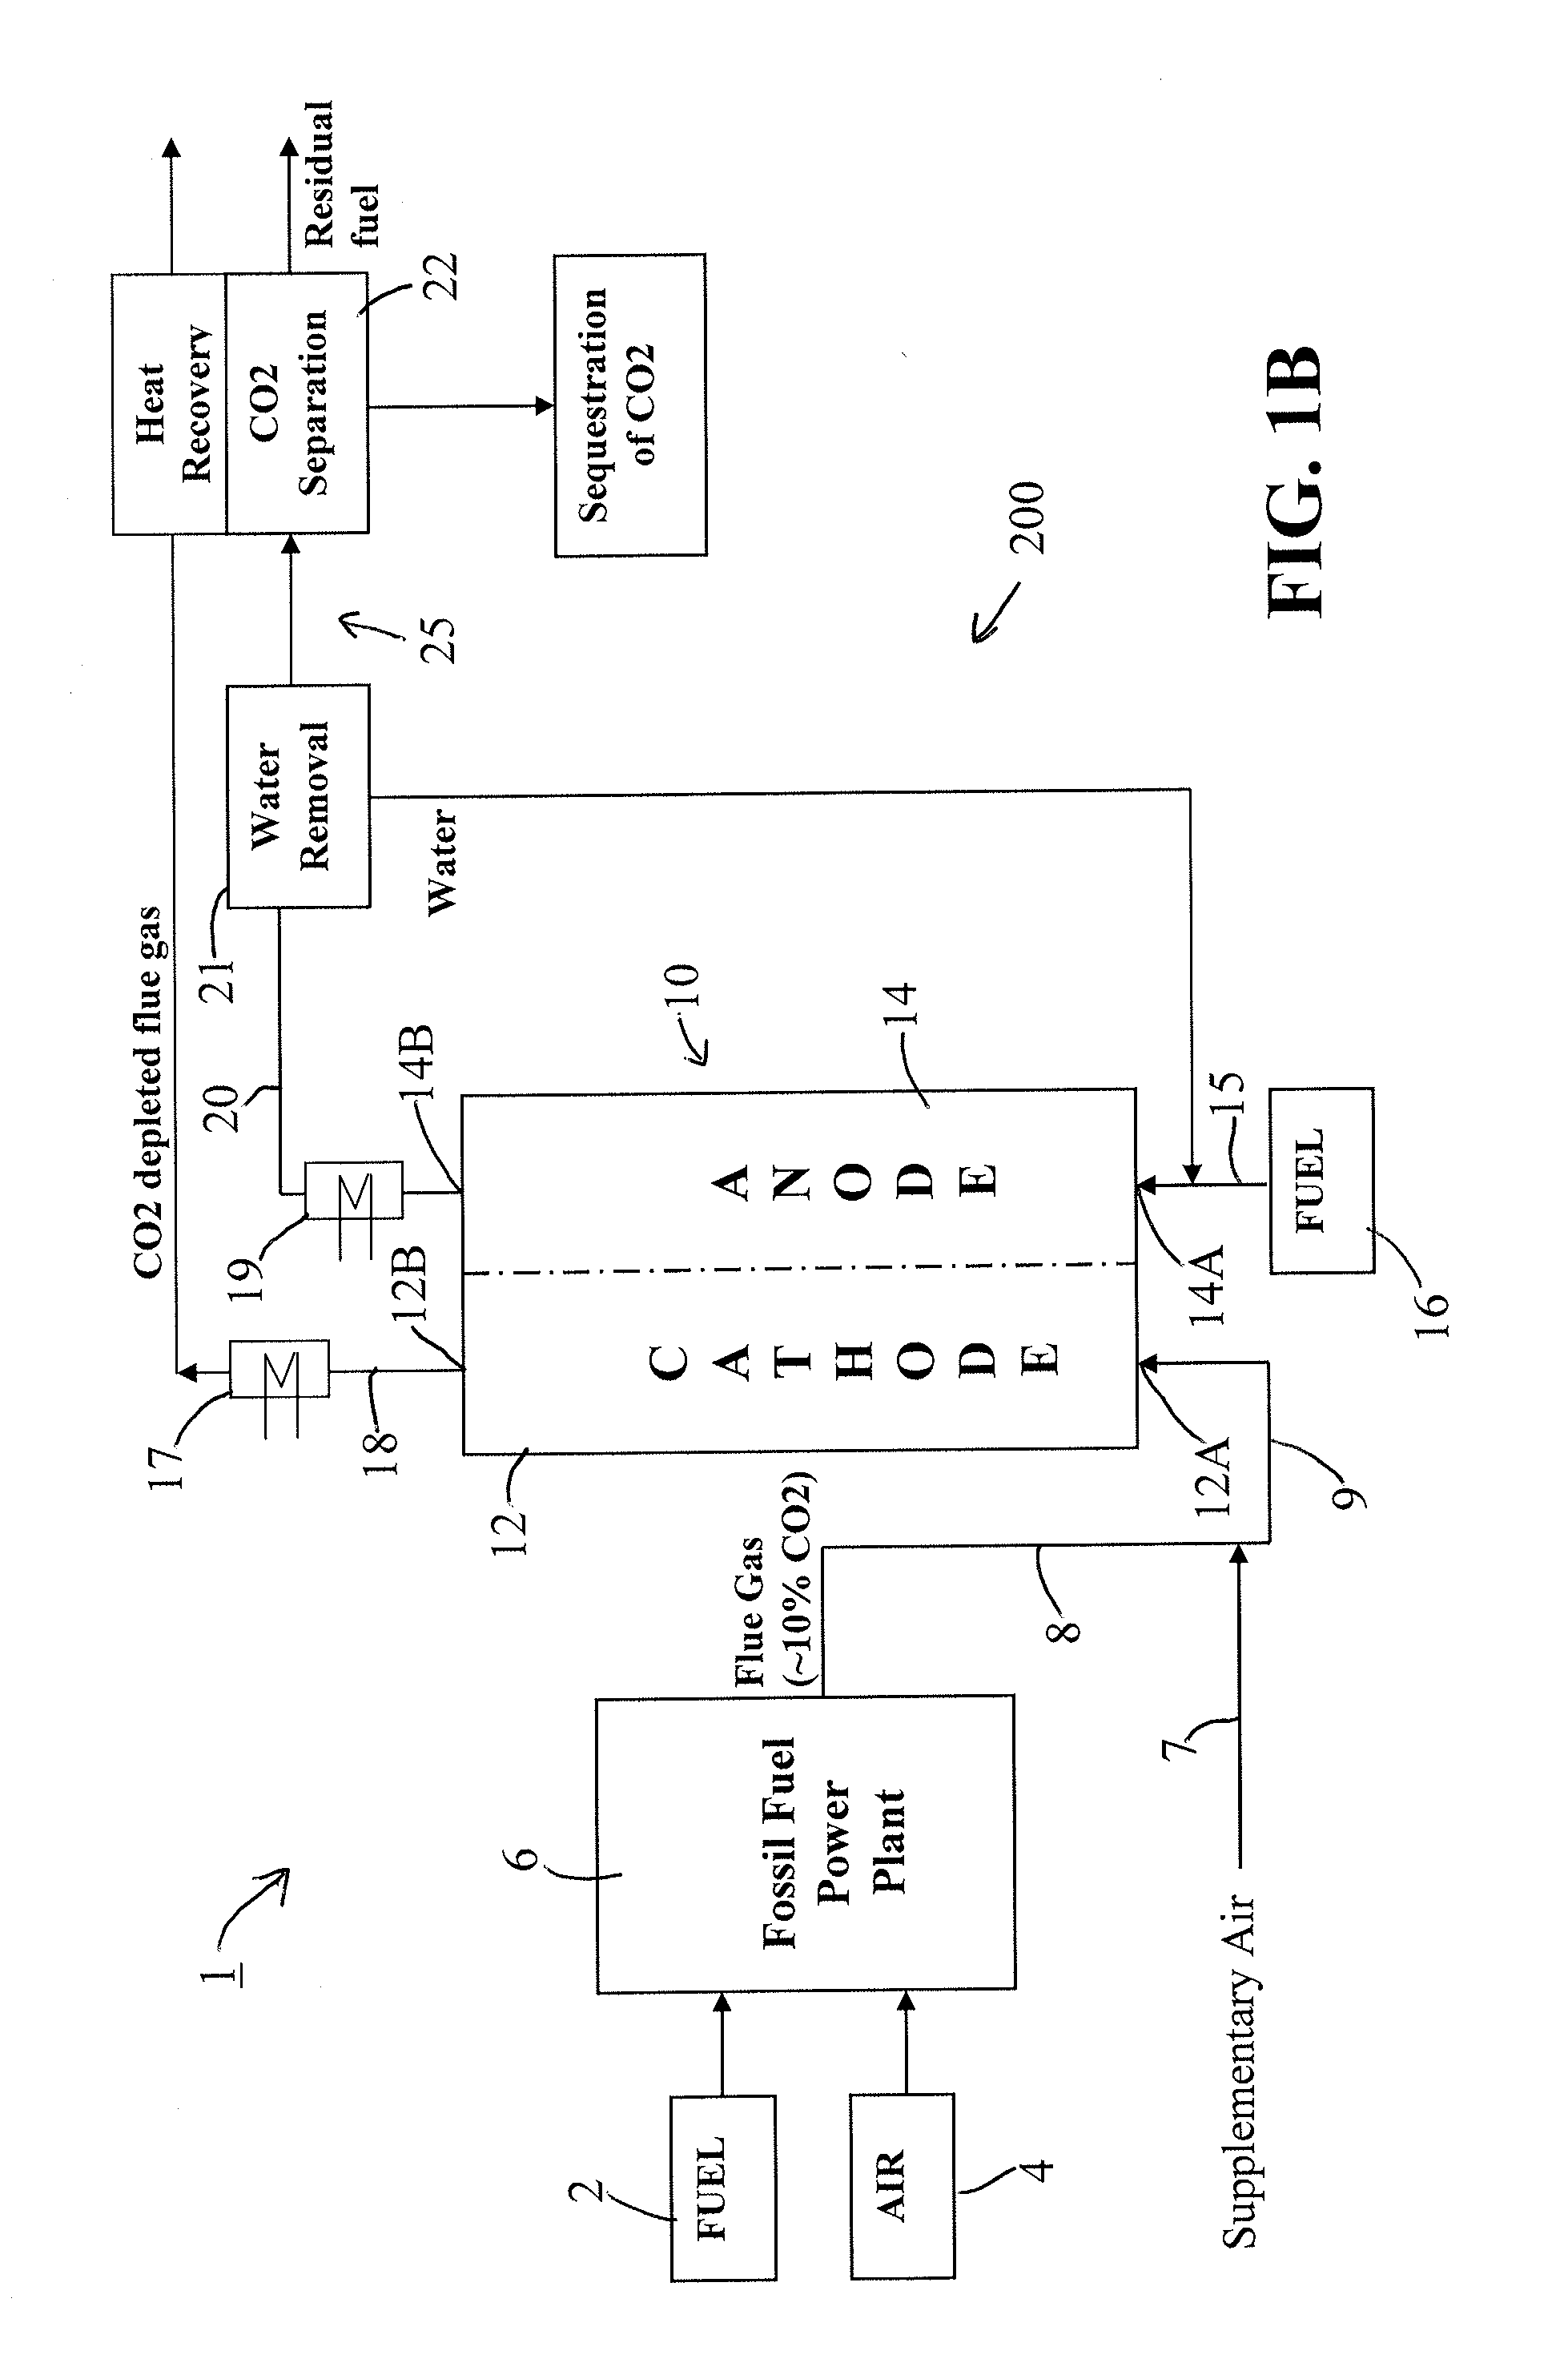 Power producing gas separation system and method